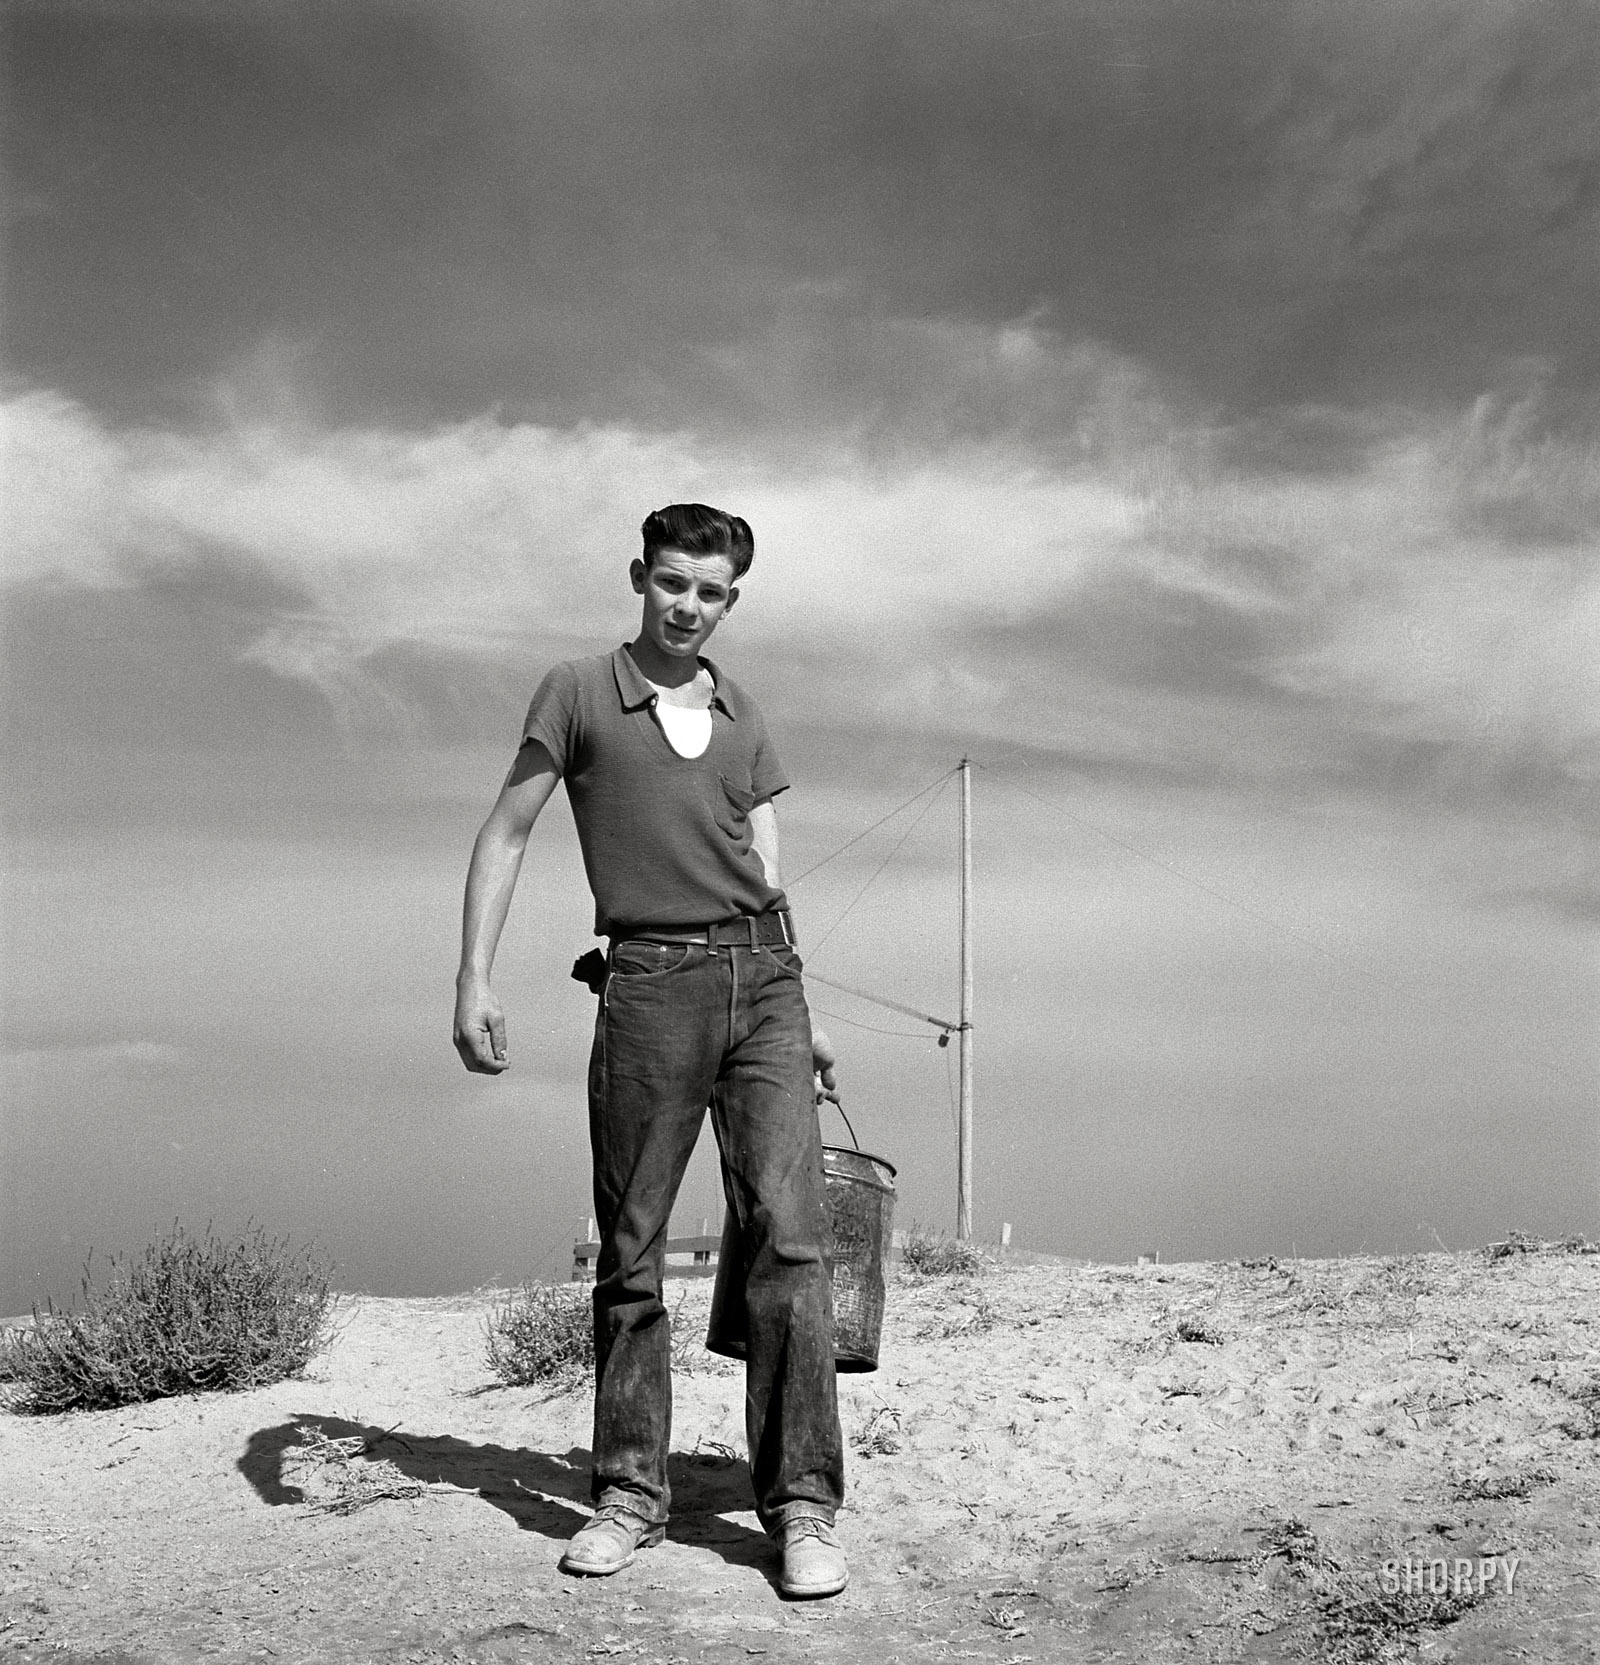 October 1939. "Dazey farm. Seventeen year old boy going to feed the pigs. Homedale district, Malheur County, Oregon." Medium-format nitrate negative by Dorothea Lange for the Farm Security Administration. View full size.